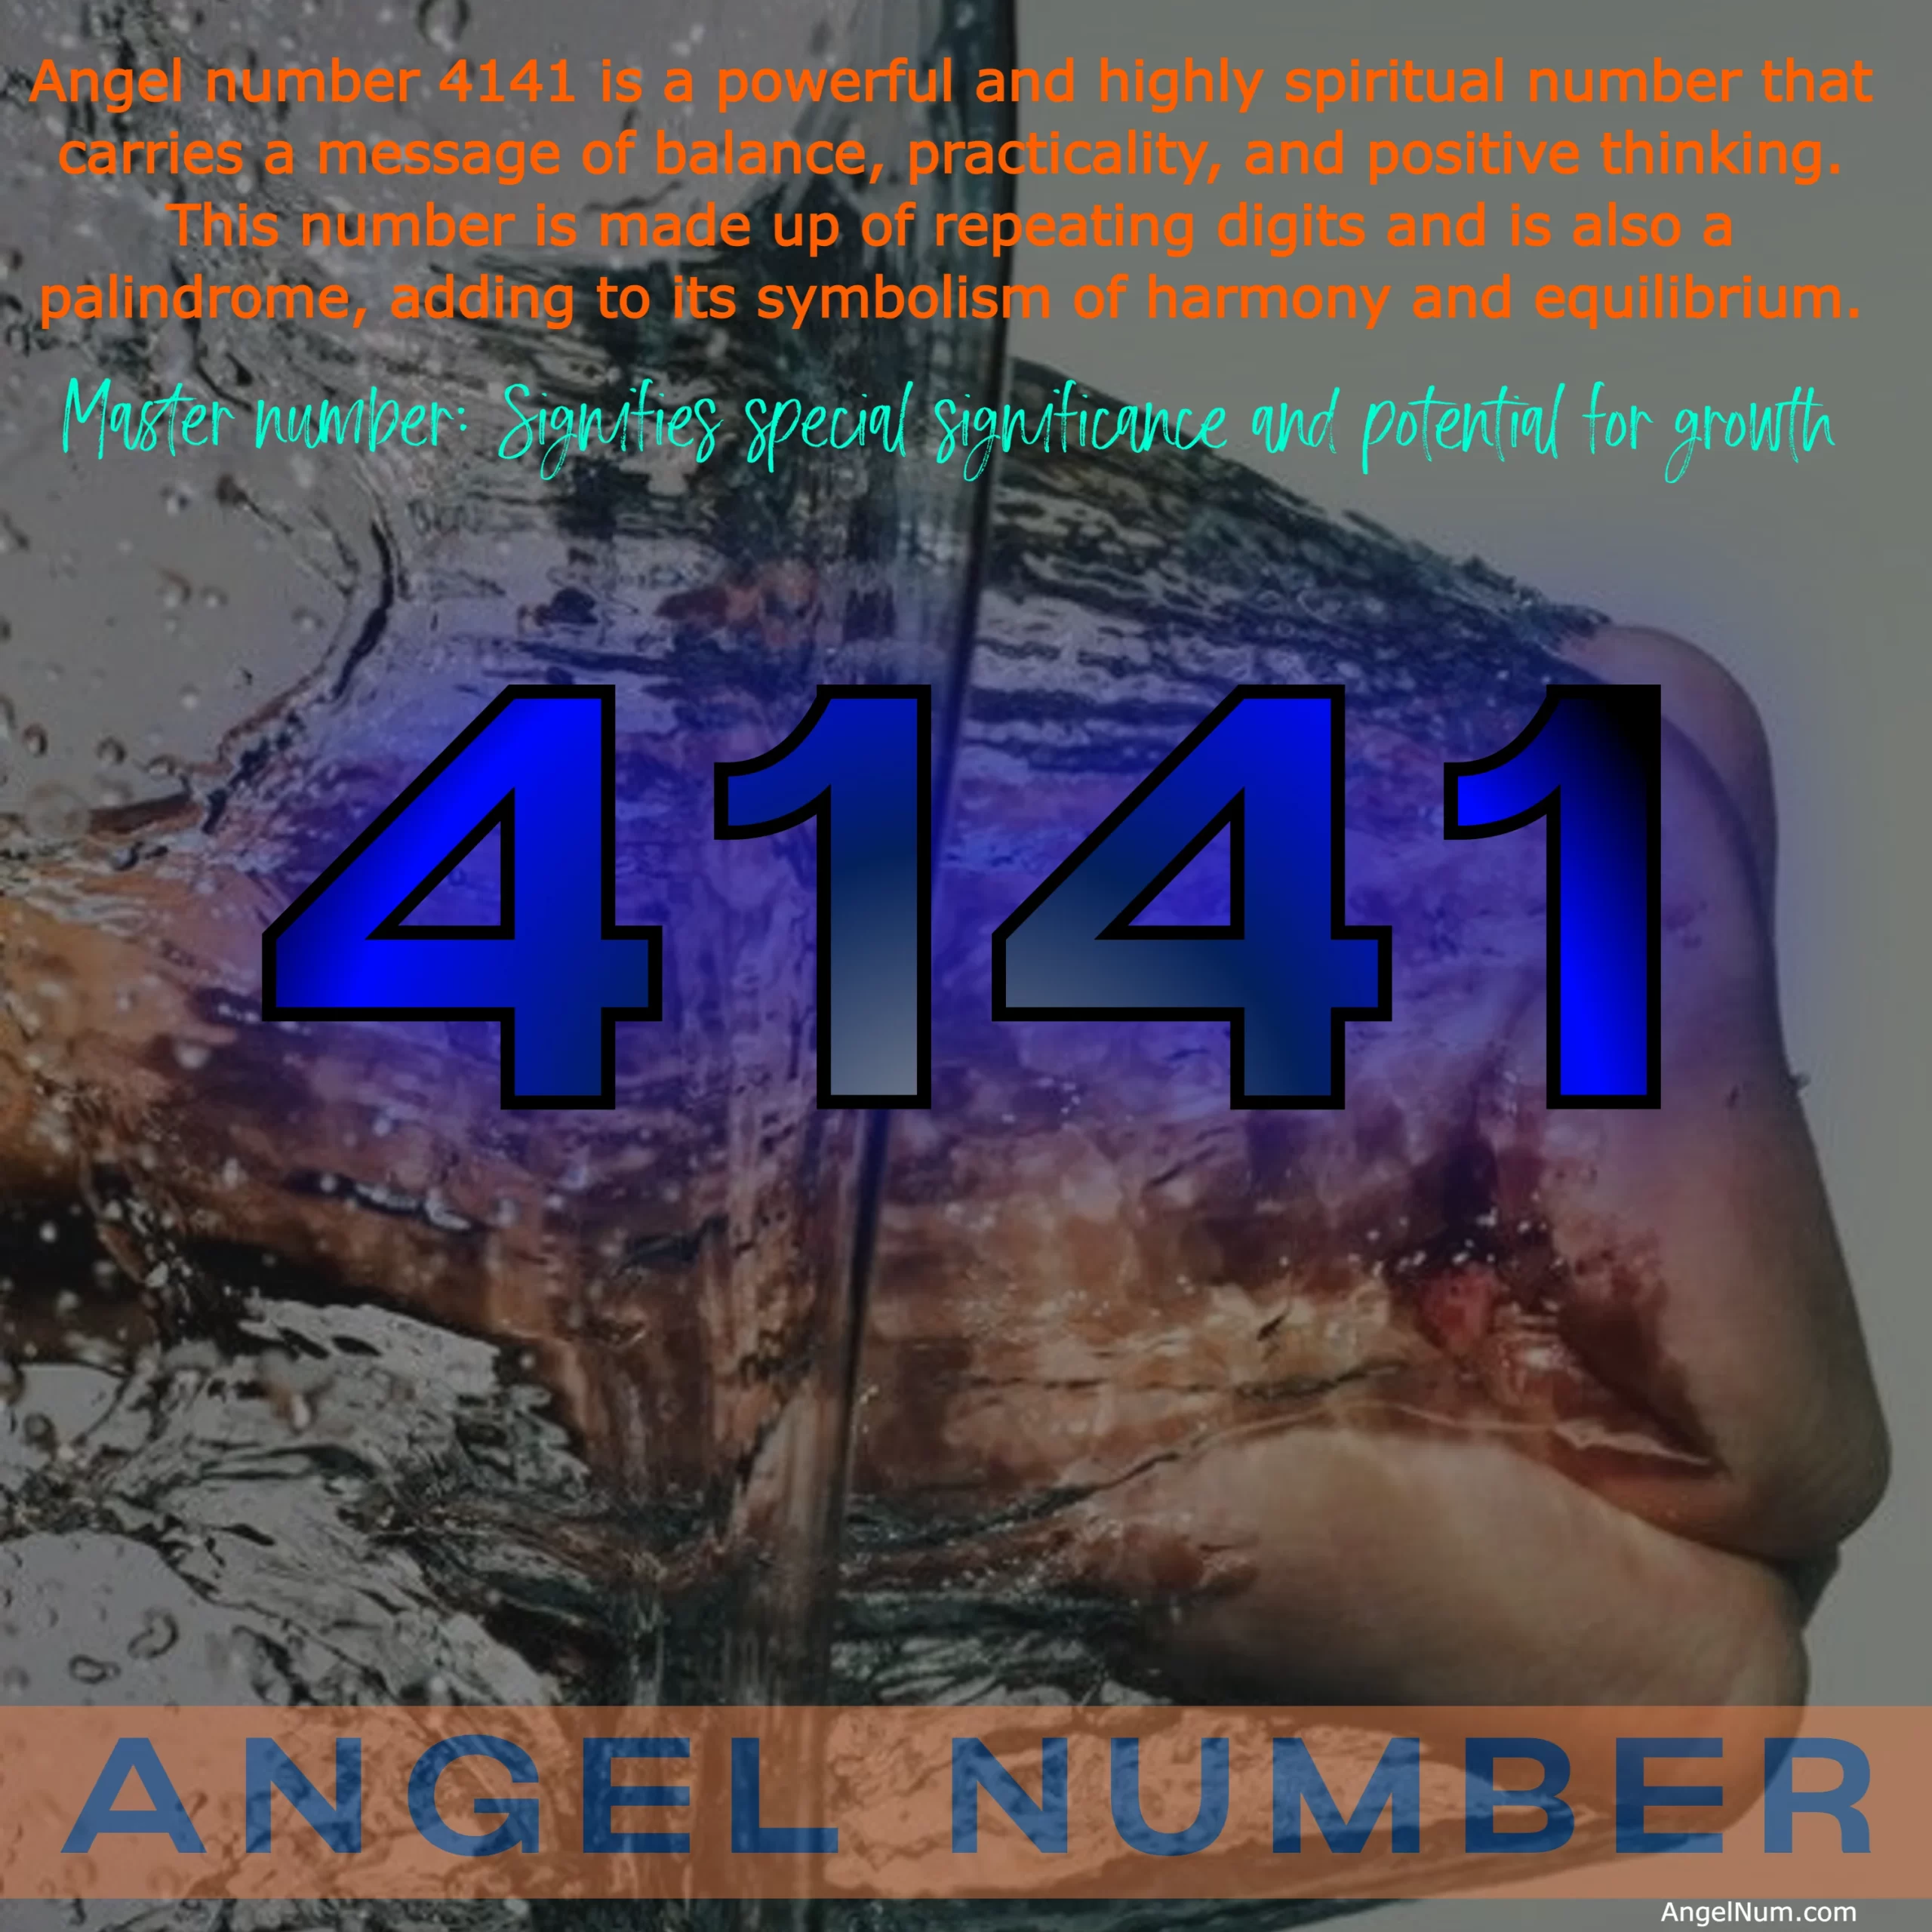 Angel Number 4141: Meaning, Symbolism, and Significance